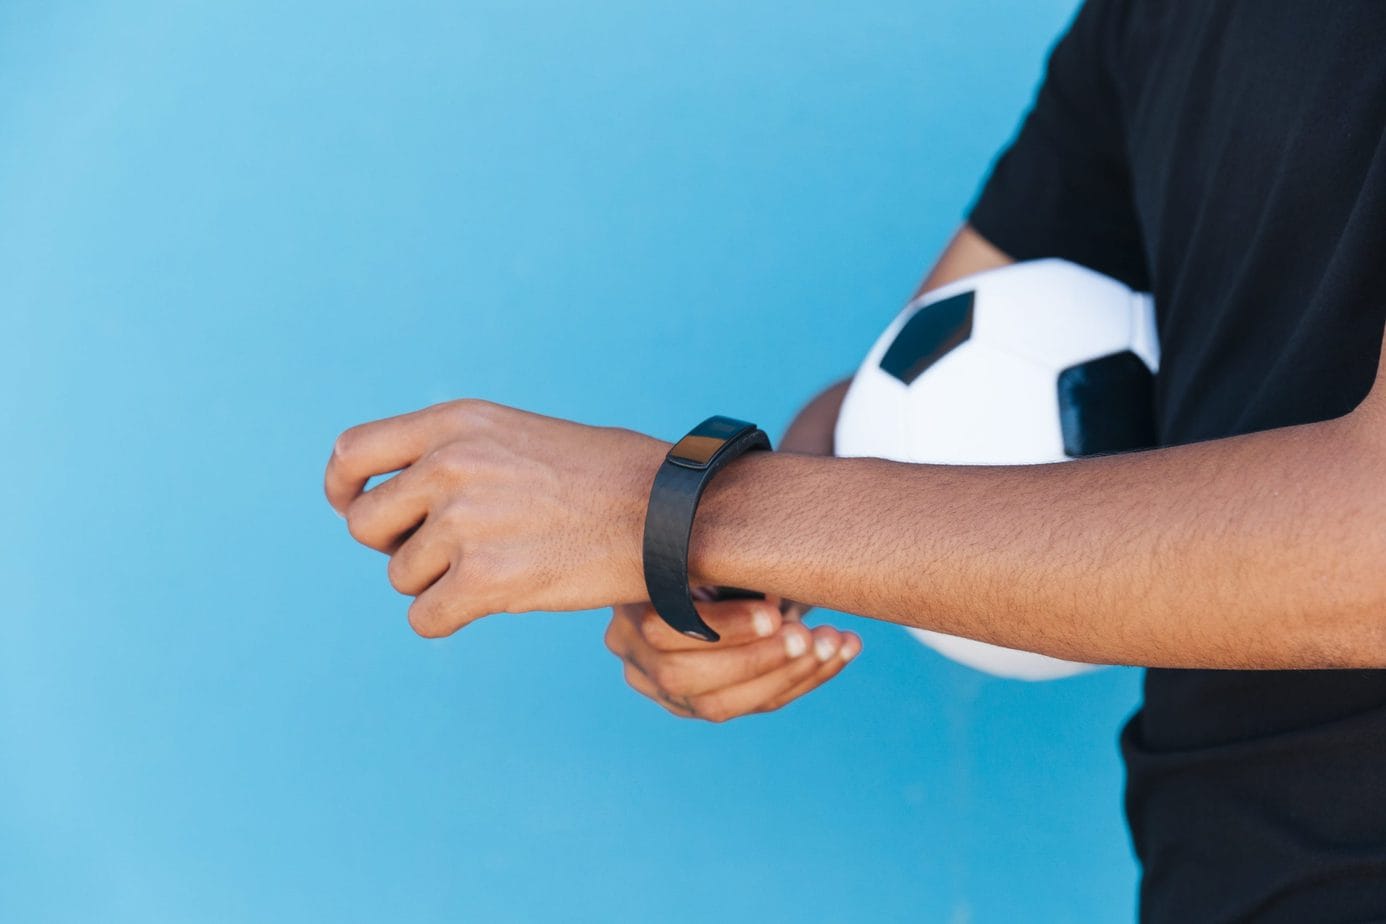 Get your heart rate under control! How do sports testers work?